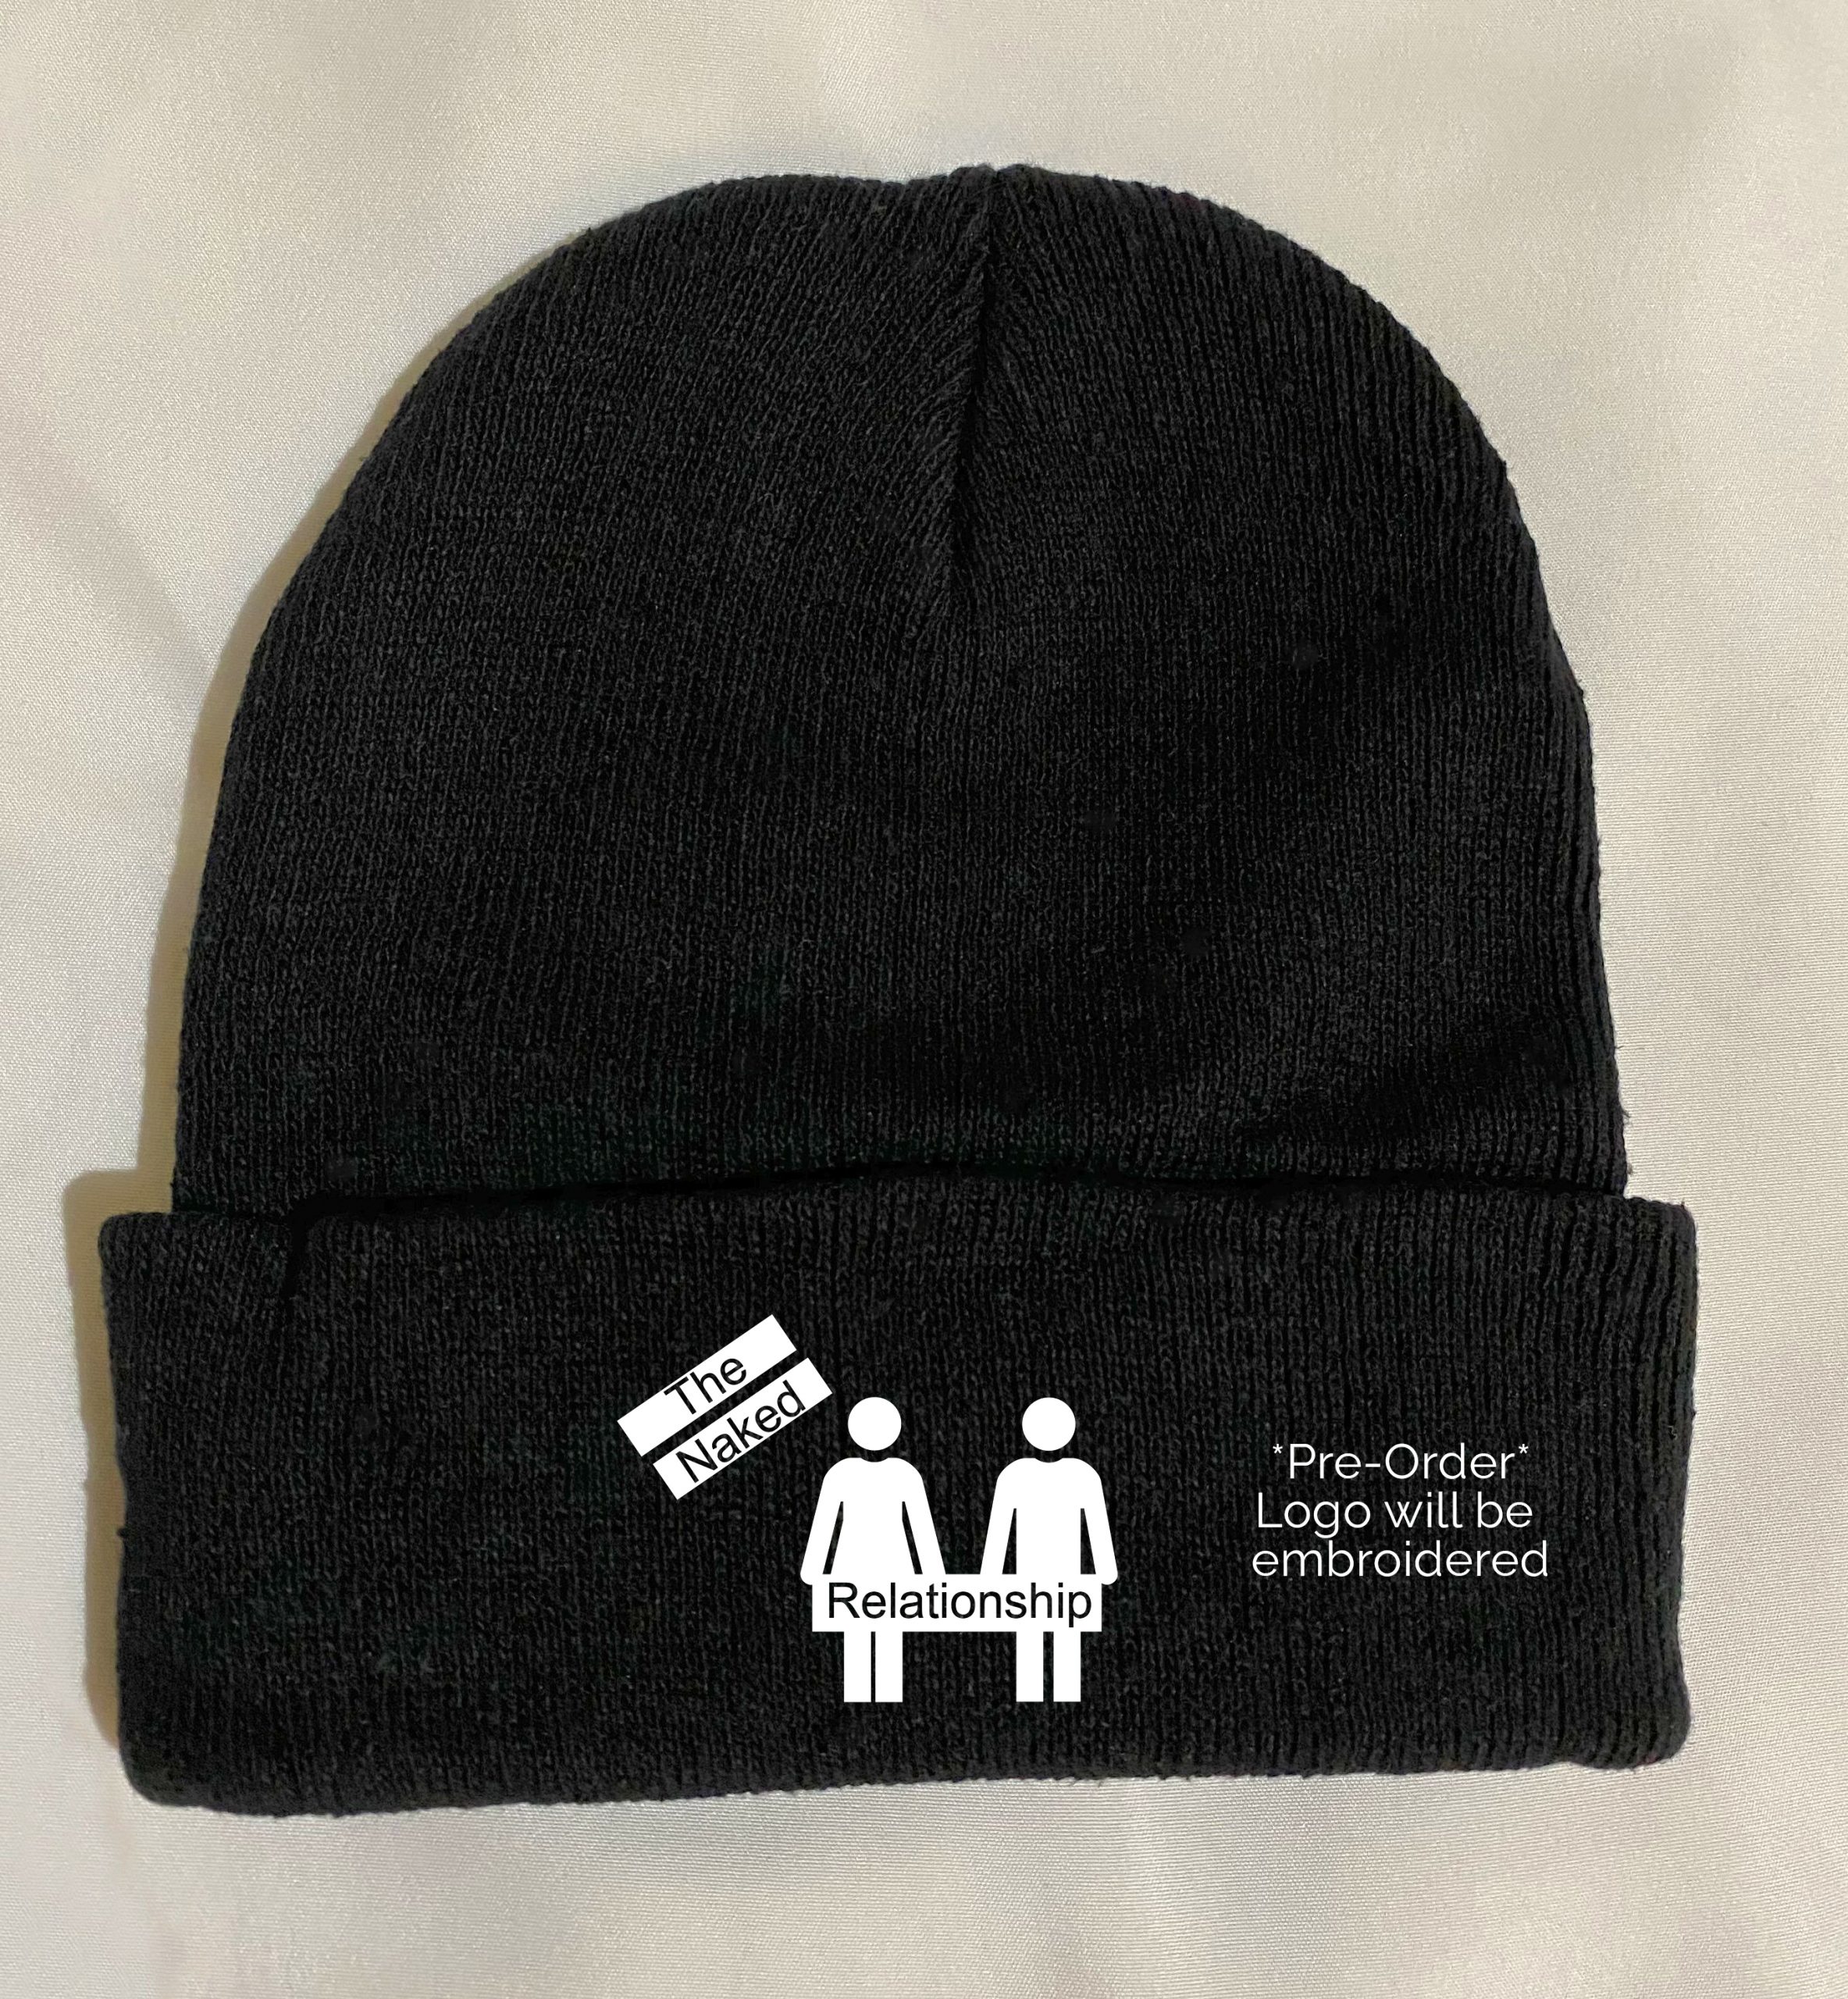 The Naked Relationship Beanie